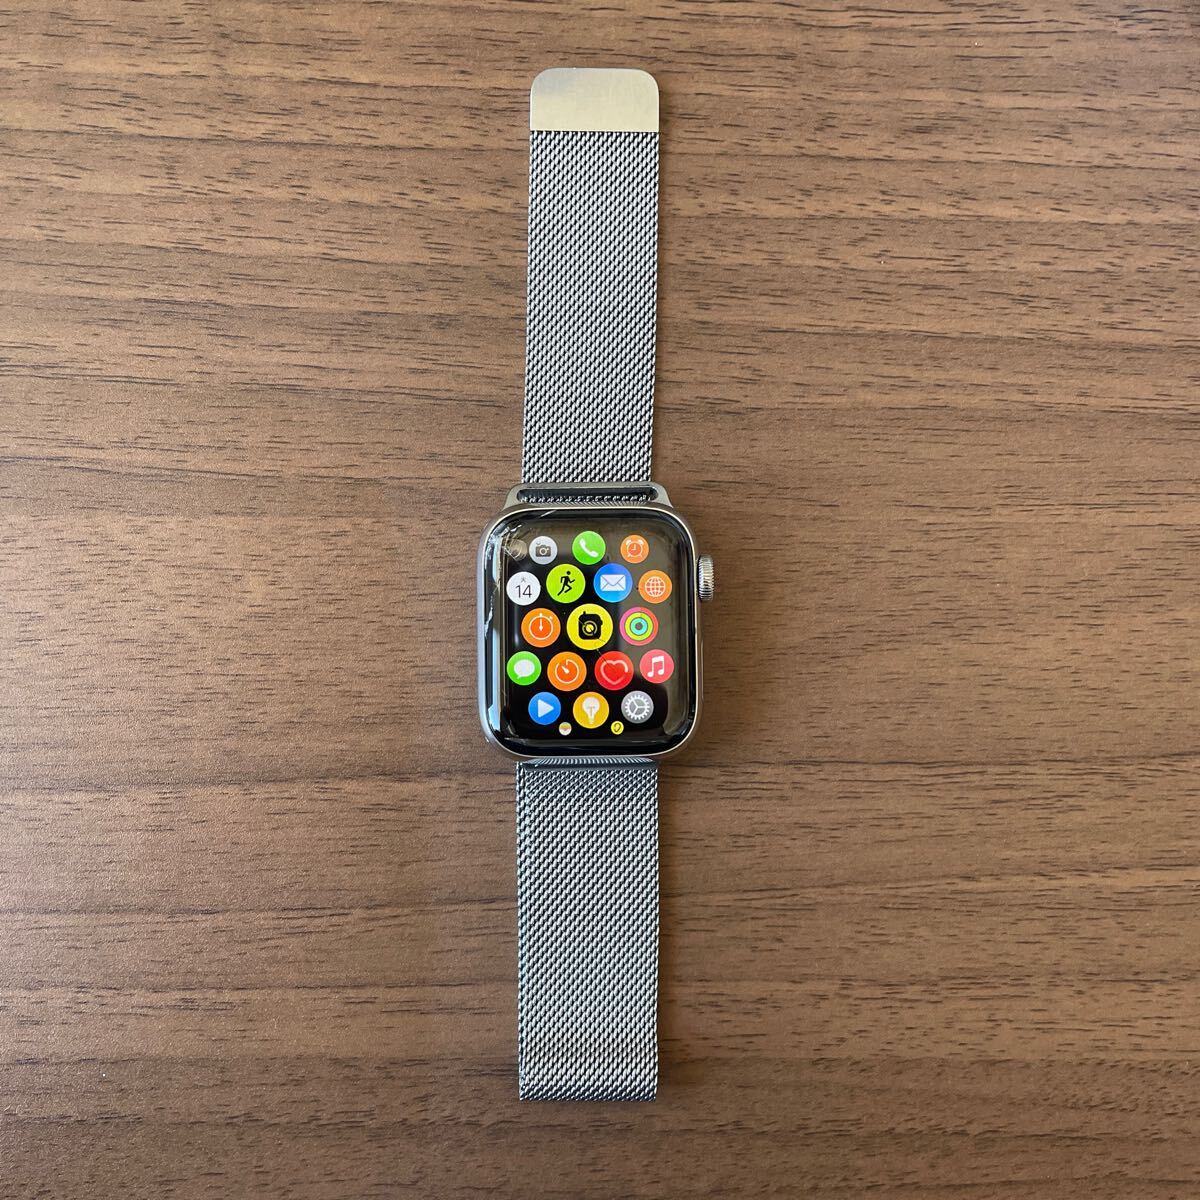 Apple Watch Series 4 Cellularモデル Stainless 画面割れ_画像1